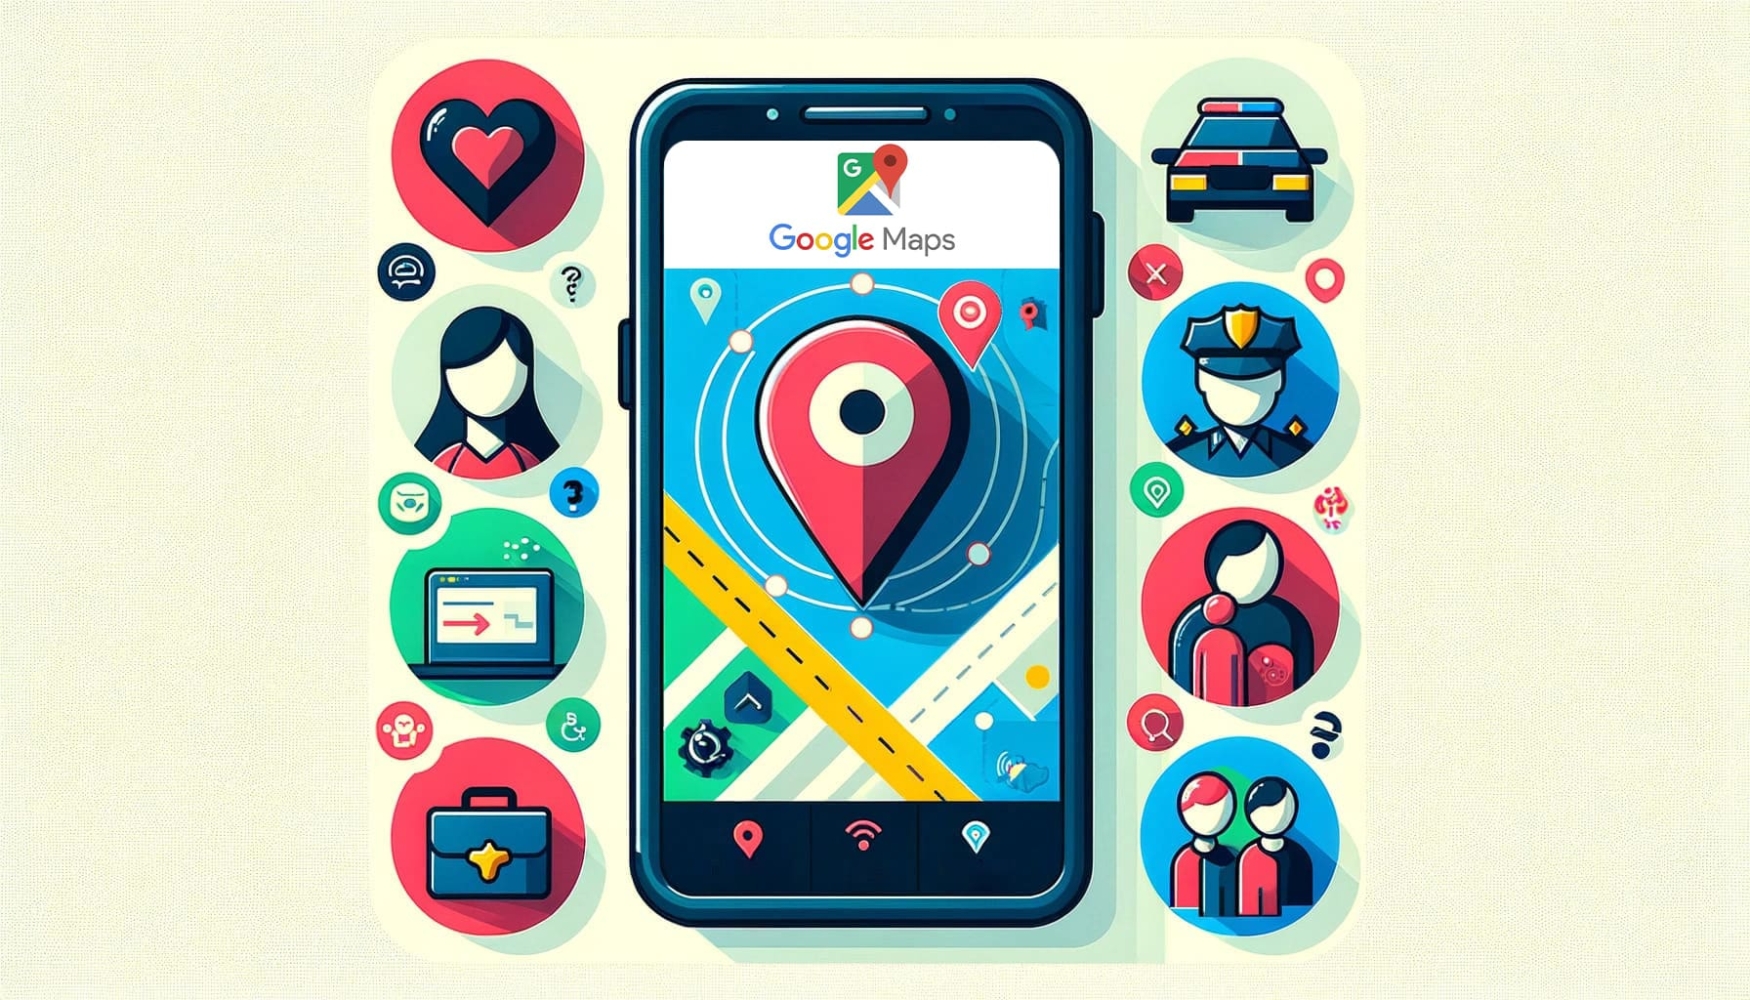 The top of the image shows a smartphone with the Google Maps app open, displaying a moving dot that represents tracking a cell phone. Below, divided into sections, are icons and brief descriptions of different scenarios: a heart icon for tracking a boyfriend/girlfriend, a police badge for locating a stolen phone, a question mark for tracing unknown calls, and family icons for monitoring children or parents. Another section shows a briefcase icon for employee tracking. The overall design is modern and user-friendly, with a color palette that's both engaging and professional.